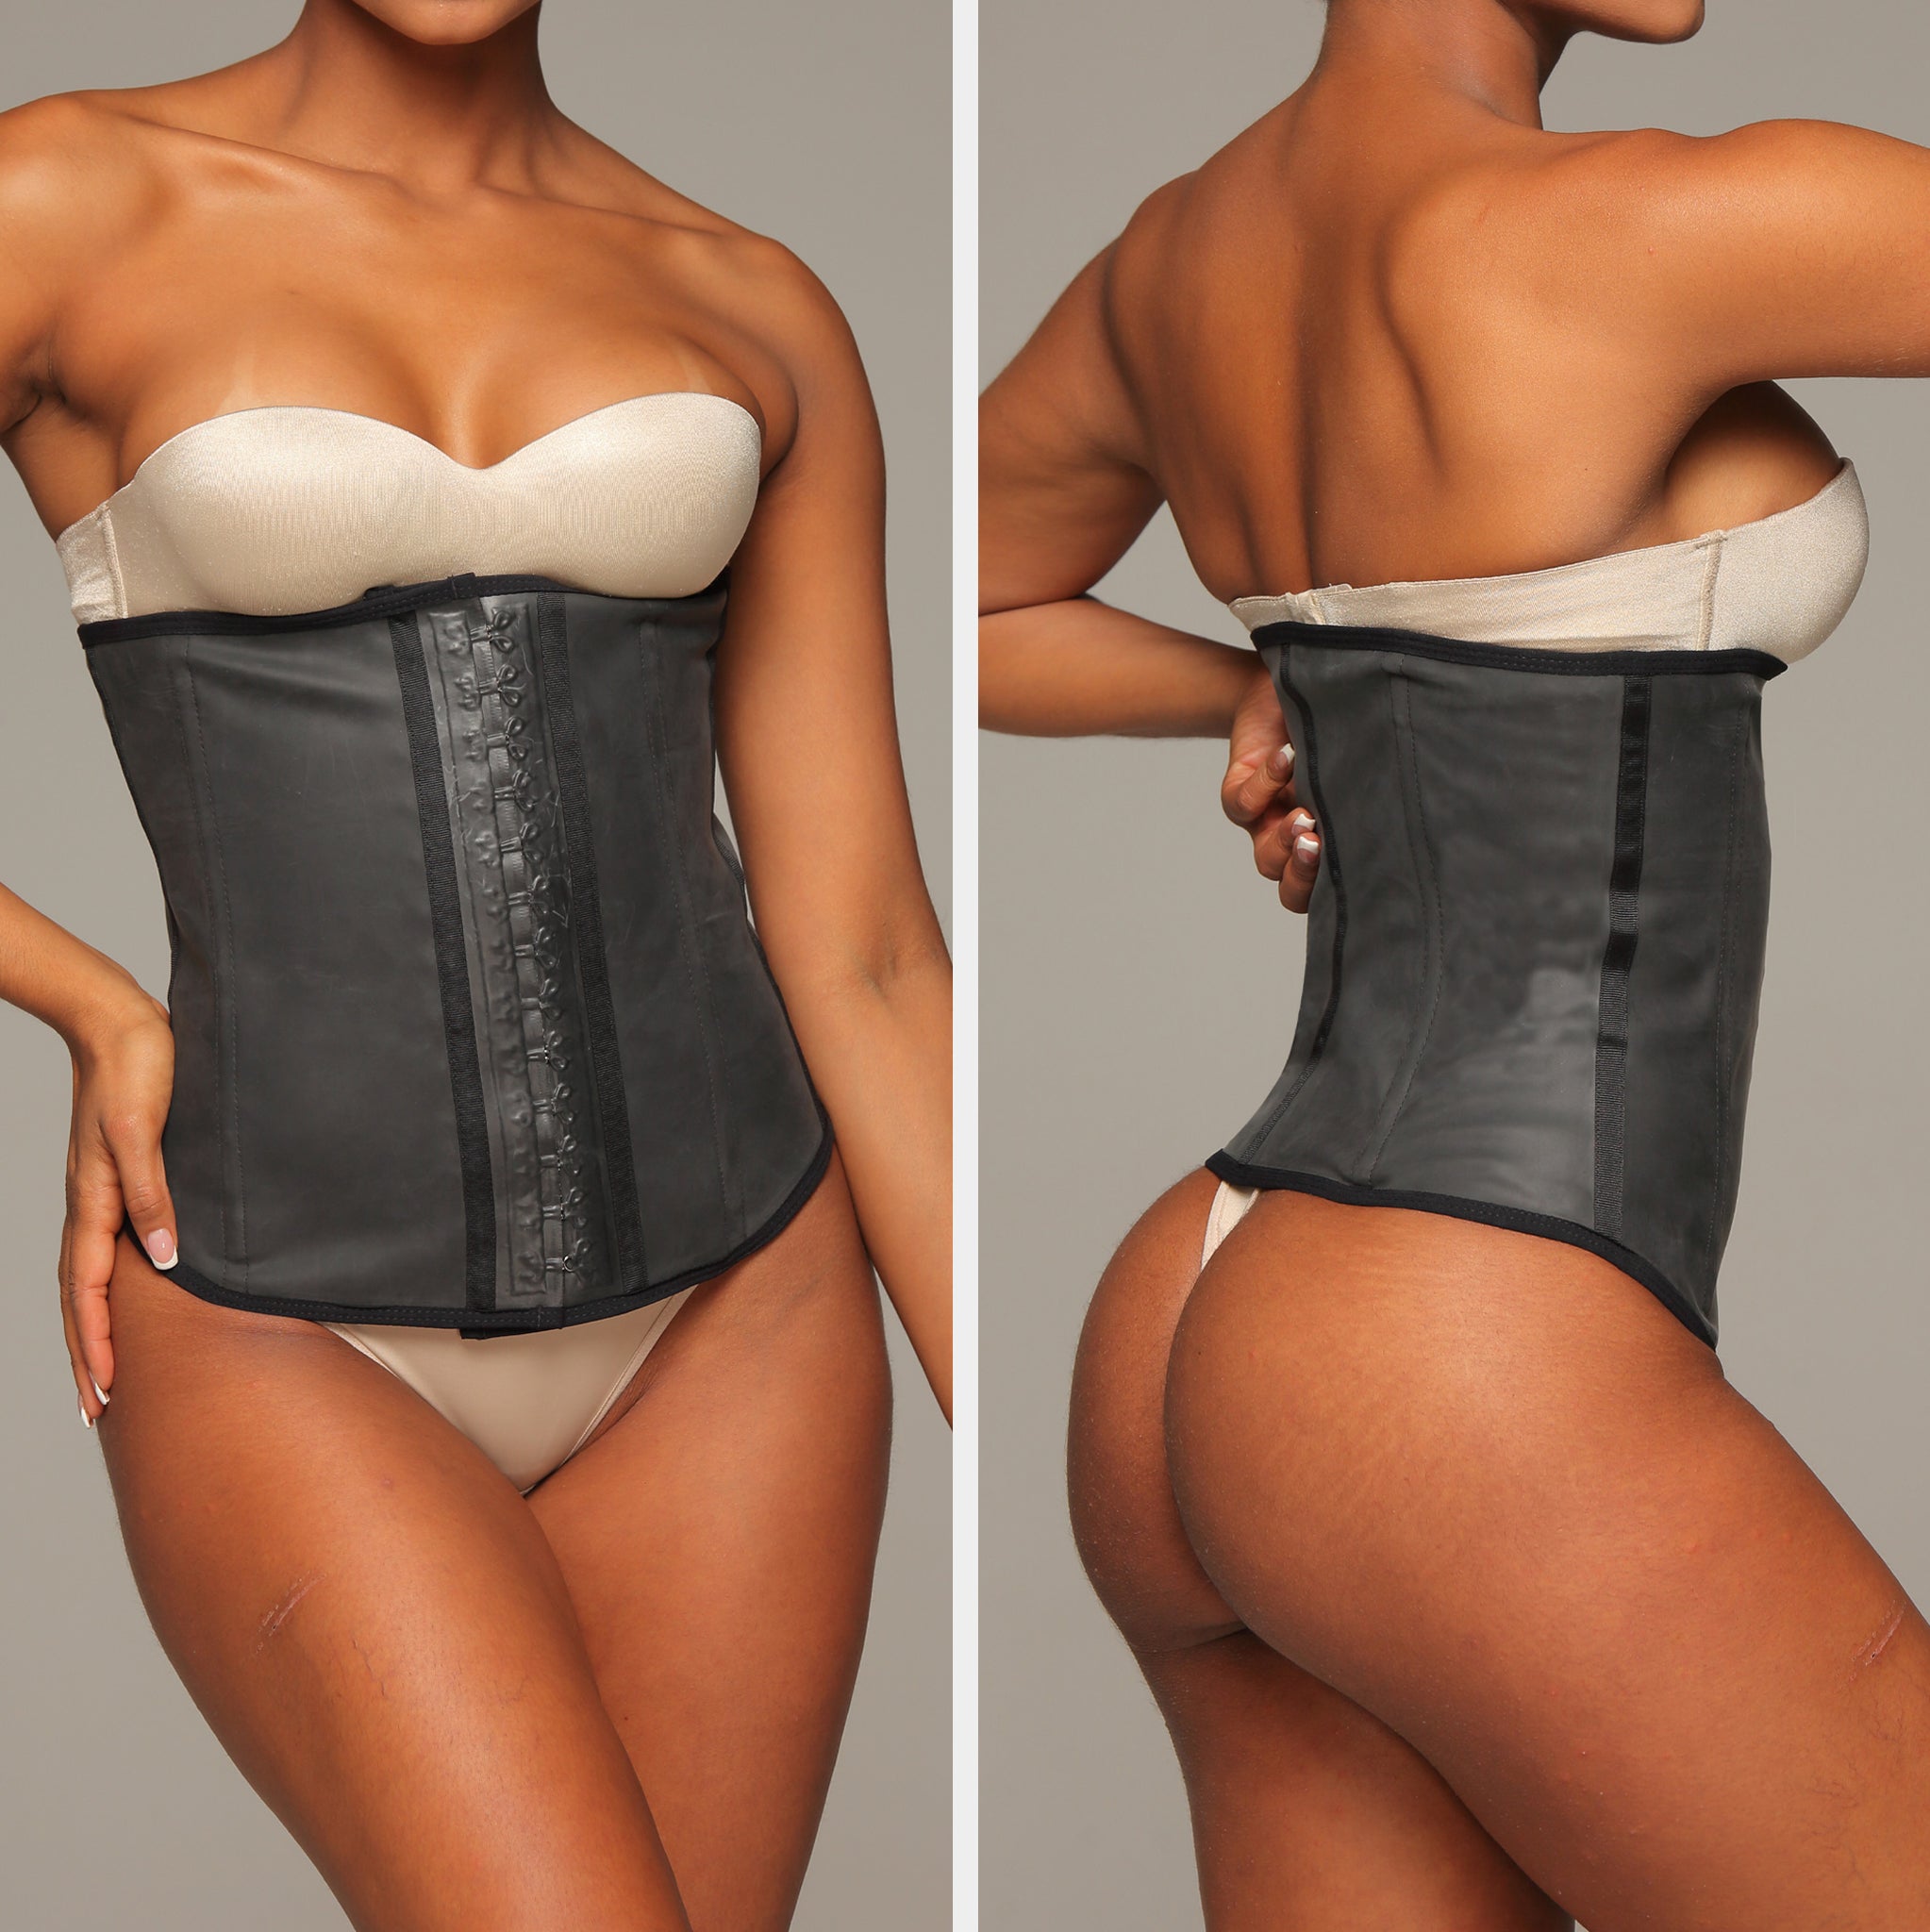 Waist Cincher vs. Waist Trainer: What's the Difference?